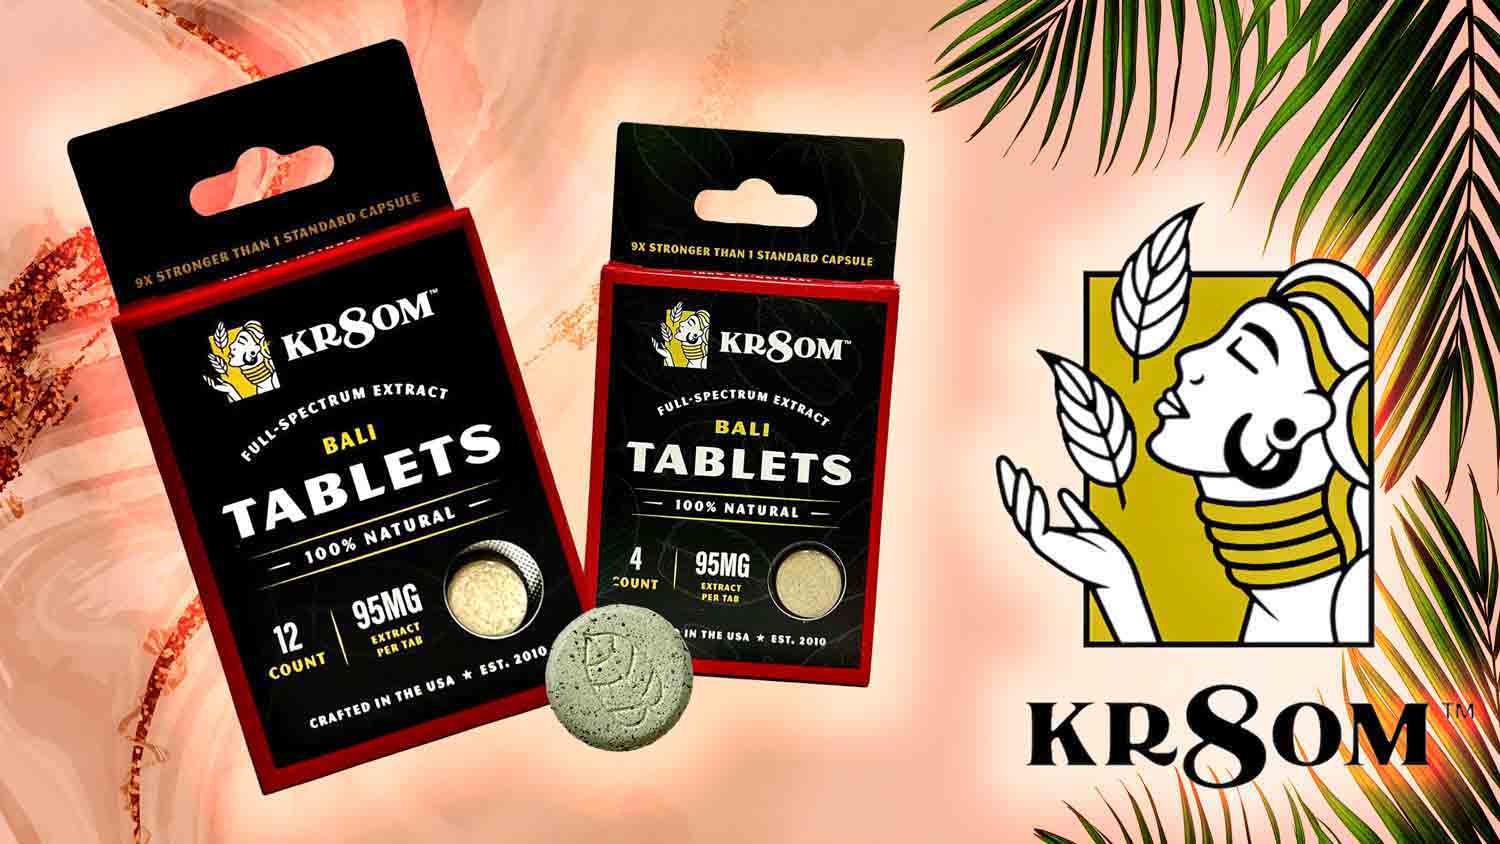 Kr8om Kratom Extract Tablets Bali 95 mg 4 count & 12 count 